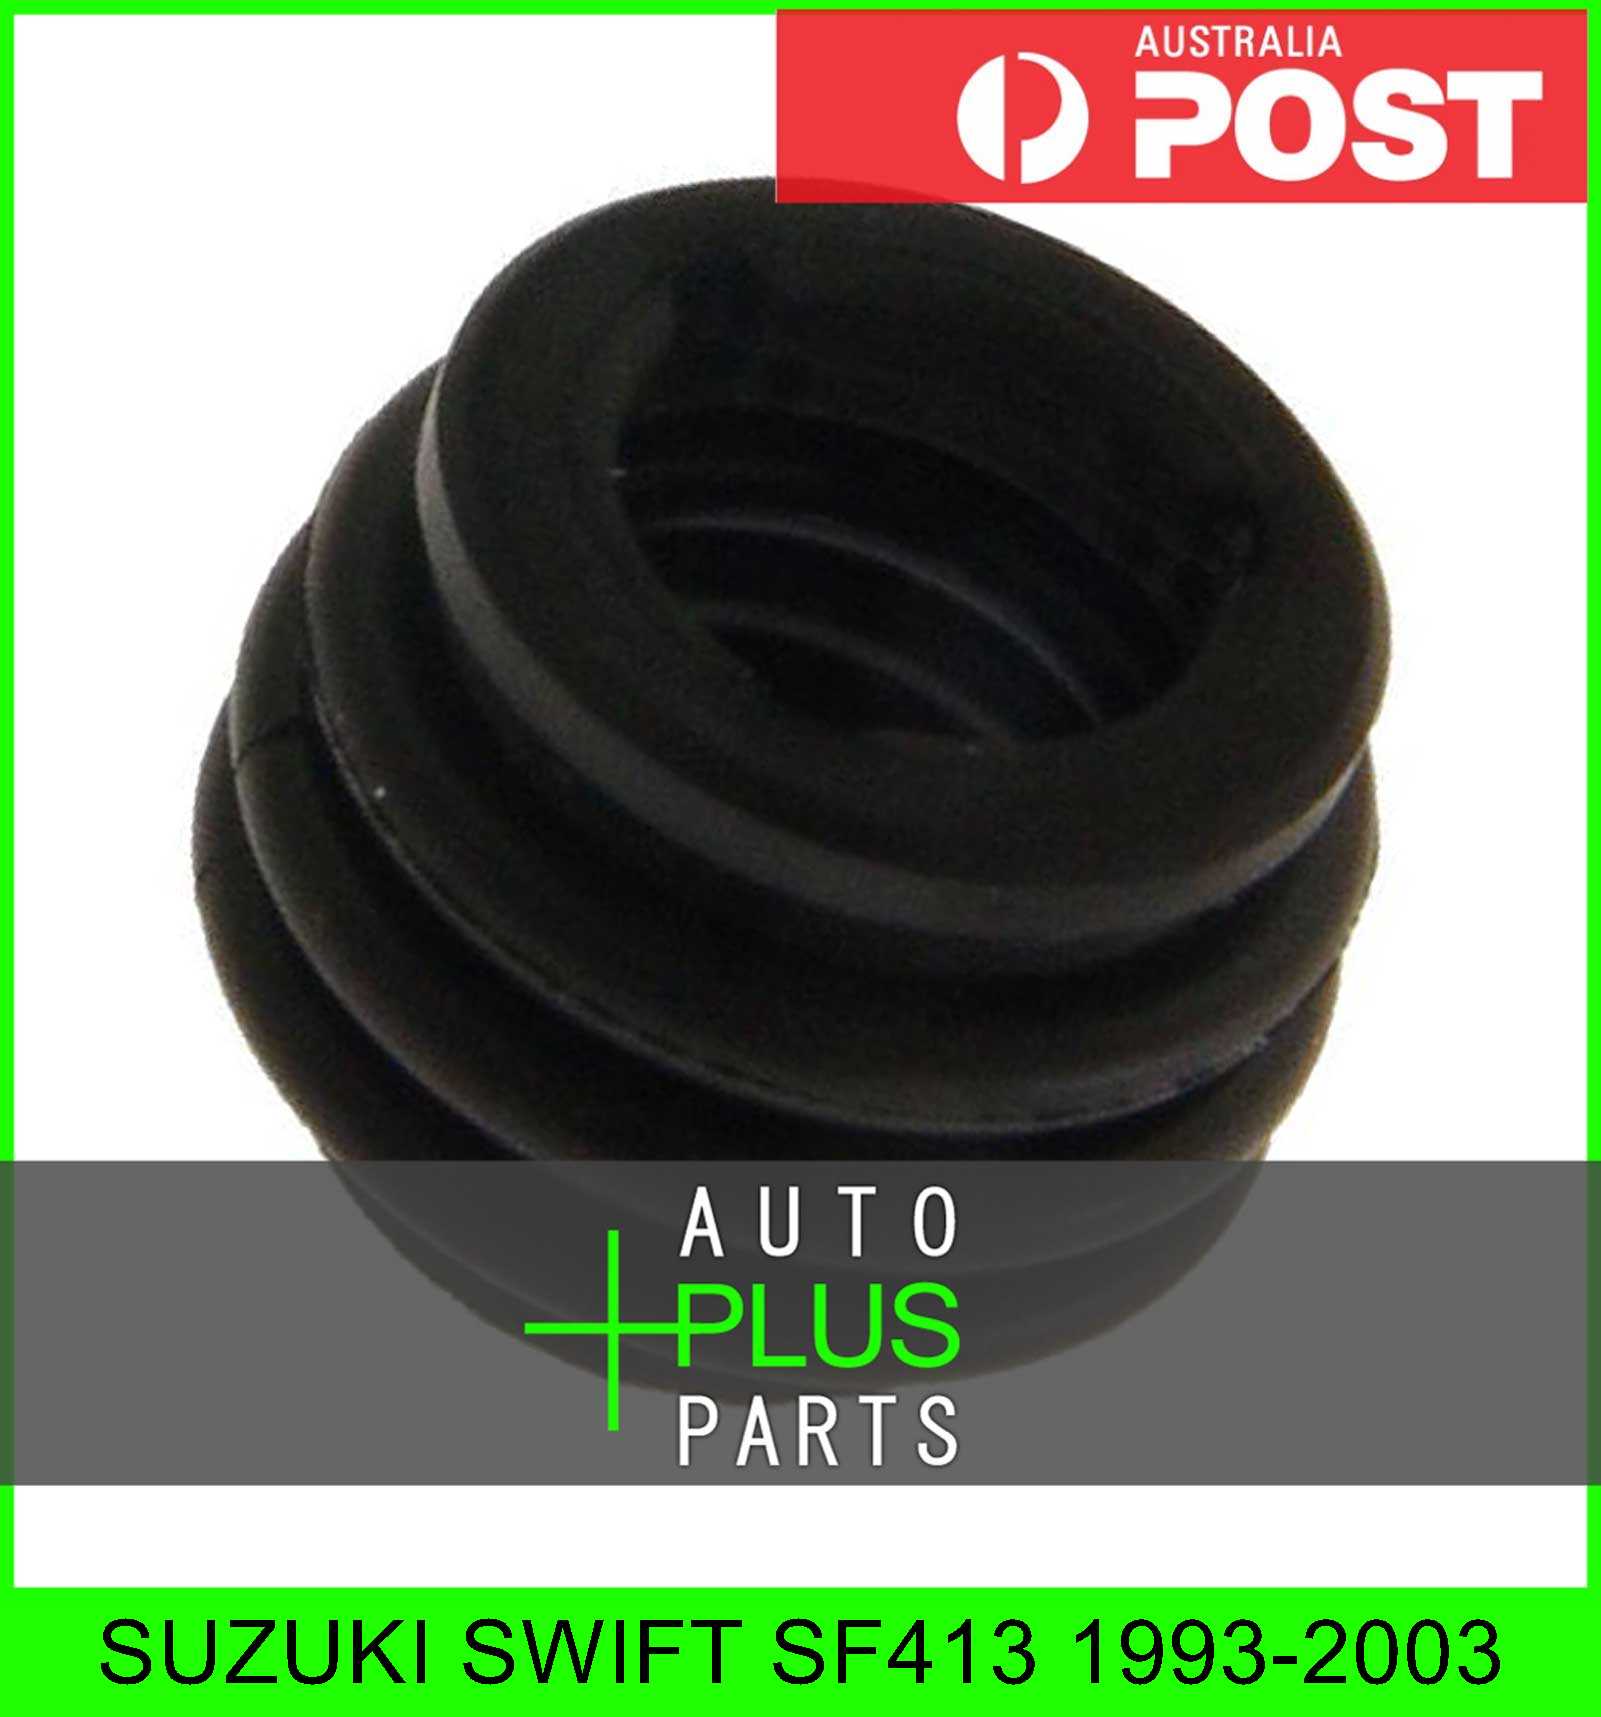 AISIN Clutch Slave Cylinder for 1985-1987 Toyota Corolla 1.6L L4 fh 